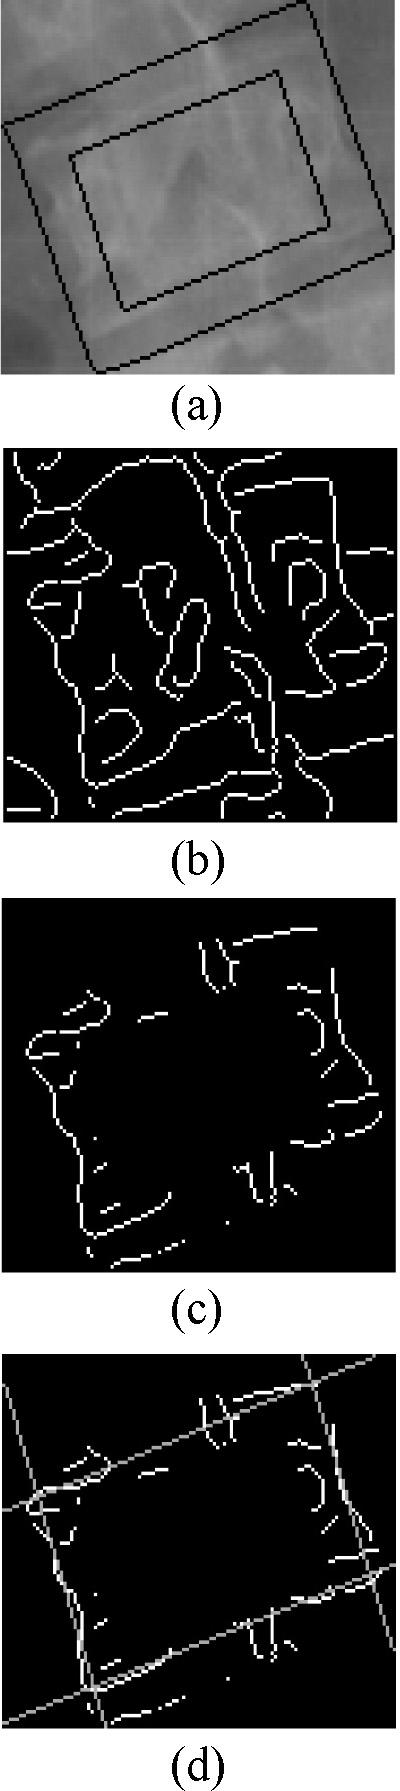 2 shows an ROI with the inner and outer rectangles (Fig. 2(a)), the edge image of the ROI (Fig. 2(b)), and the edge image with noises deleted (Fig. 2(c)).